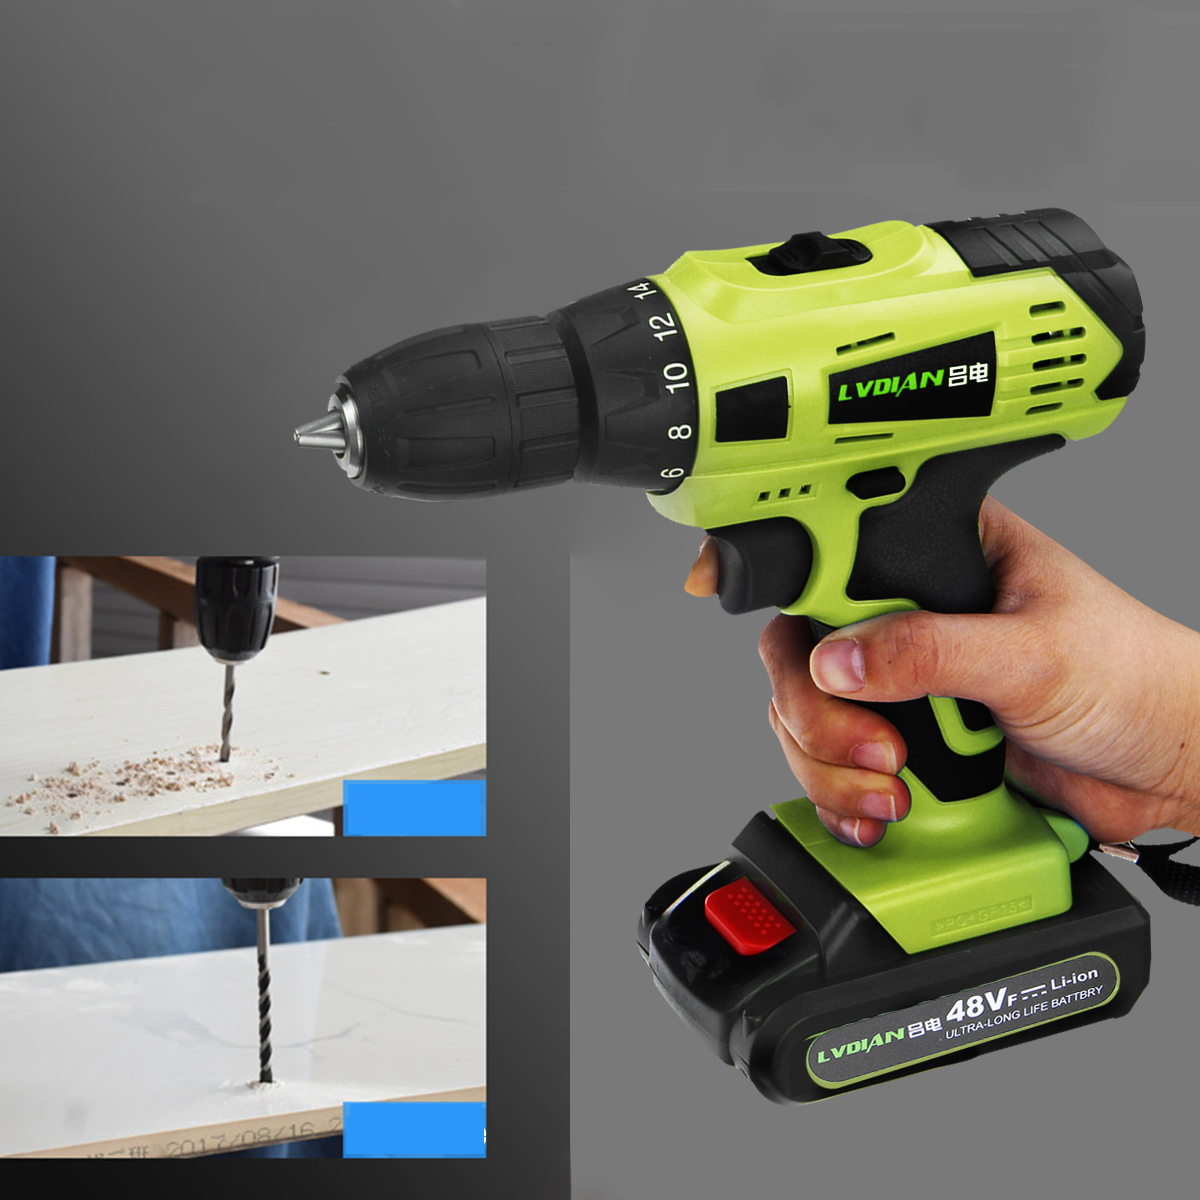 48V-2-Speed-Cordless-Electric-Screwdriver-Drill-LED-Rechargeable-Waterproof-Electric-Power-Dirver-Dr-1599546-2